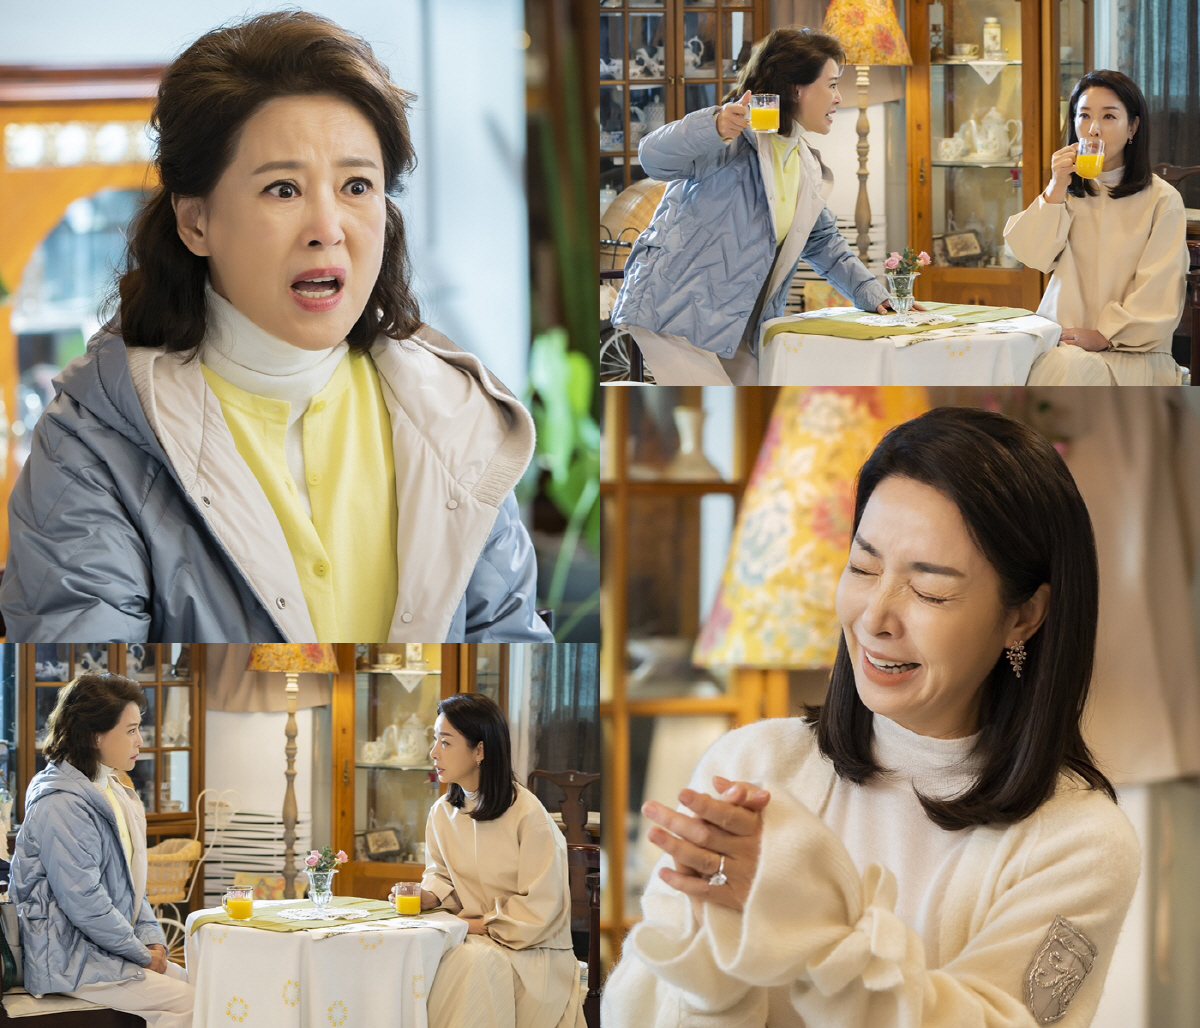 Cha Hwa-Yeon and Kim Bo-yeon show off the bloody Ansuk Chemie in Ive Goed Once.On March 28 (Saturday) at 7:55 pm, KBS 2TVs new Weekend drama Ive Goed Once (playplayplayed by Yang Hee-seung, director Lee Jae-sang, production Studio Dragon, main factory) will present various fun to the disassembled anime theater by Cha Hwa-Yeon (played by Jang Ok-bun) and Kim Bo-yeon (played by Choi Yoon-jung).First, Cha Hwa-Yeon is divided into a strong mother, Jang Ok-bun, who is the wife of Song Young-dal (Chun Ho-jin), and who has raised your Brother and Sister.She is suffering from the successive divorce of her children, and she will spend her restless days with her four Brother and Sisters and will cause the wryness of the viewers.Kim Bo-yeon played Choi Yoon-jung, a mother of Yoon Gyu-jin (Lee Sang-yeop) and Yoon Jae-seok (Lee Sang-bok), who are from Chunhyang, Miss.Yoon Jung, a mother who is a mother of son fool, is delighted to see her as a charm full of beauty.Especially, he plays a subtle nervous battle with his son, Jang Ok-bun (Cha Hwa-Yeon), who was a rival since childhood.In the meantime, even when I get older, I see two people confronting each other as if they have not narrowed down.Kim Bo-yeons expression, looking at Cha Hwa-Yeon, who is angry, seems to be raising the medicine and causing laughter.Moreover, Cha Hwa-Yeon, who looks at Kim Bo-yeon, who is laughing and laughing, is trying to pour orange juice to her, drawing their relationship full of attention, and is curious about the story of the two people in the future.On the other hand, Cha Hwa-Yeon and Kim Bo-yeon are expecting the birth of the grilled Oksingakshin combo, and they have been looking forward to it. It is a pleasant and warm drama that completes their happiness search through the process of overcoming the gap and crisis between parents and children.Cha Hwa-Yeon and Kim Bo-yeon, who will fill the Weekend evening with their acting, will be able to meet on KBS 2TVs new Weekend drama Ive Goed Once, which is scheduled to be broadcasted at 7:55 pm on March 28th (Saturday).